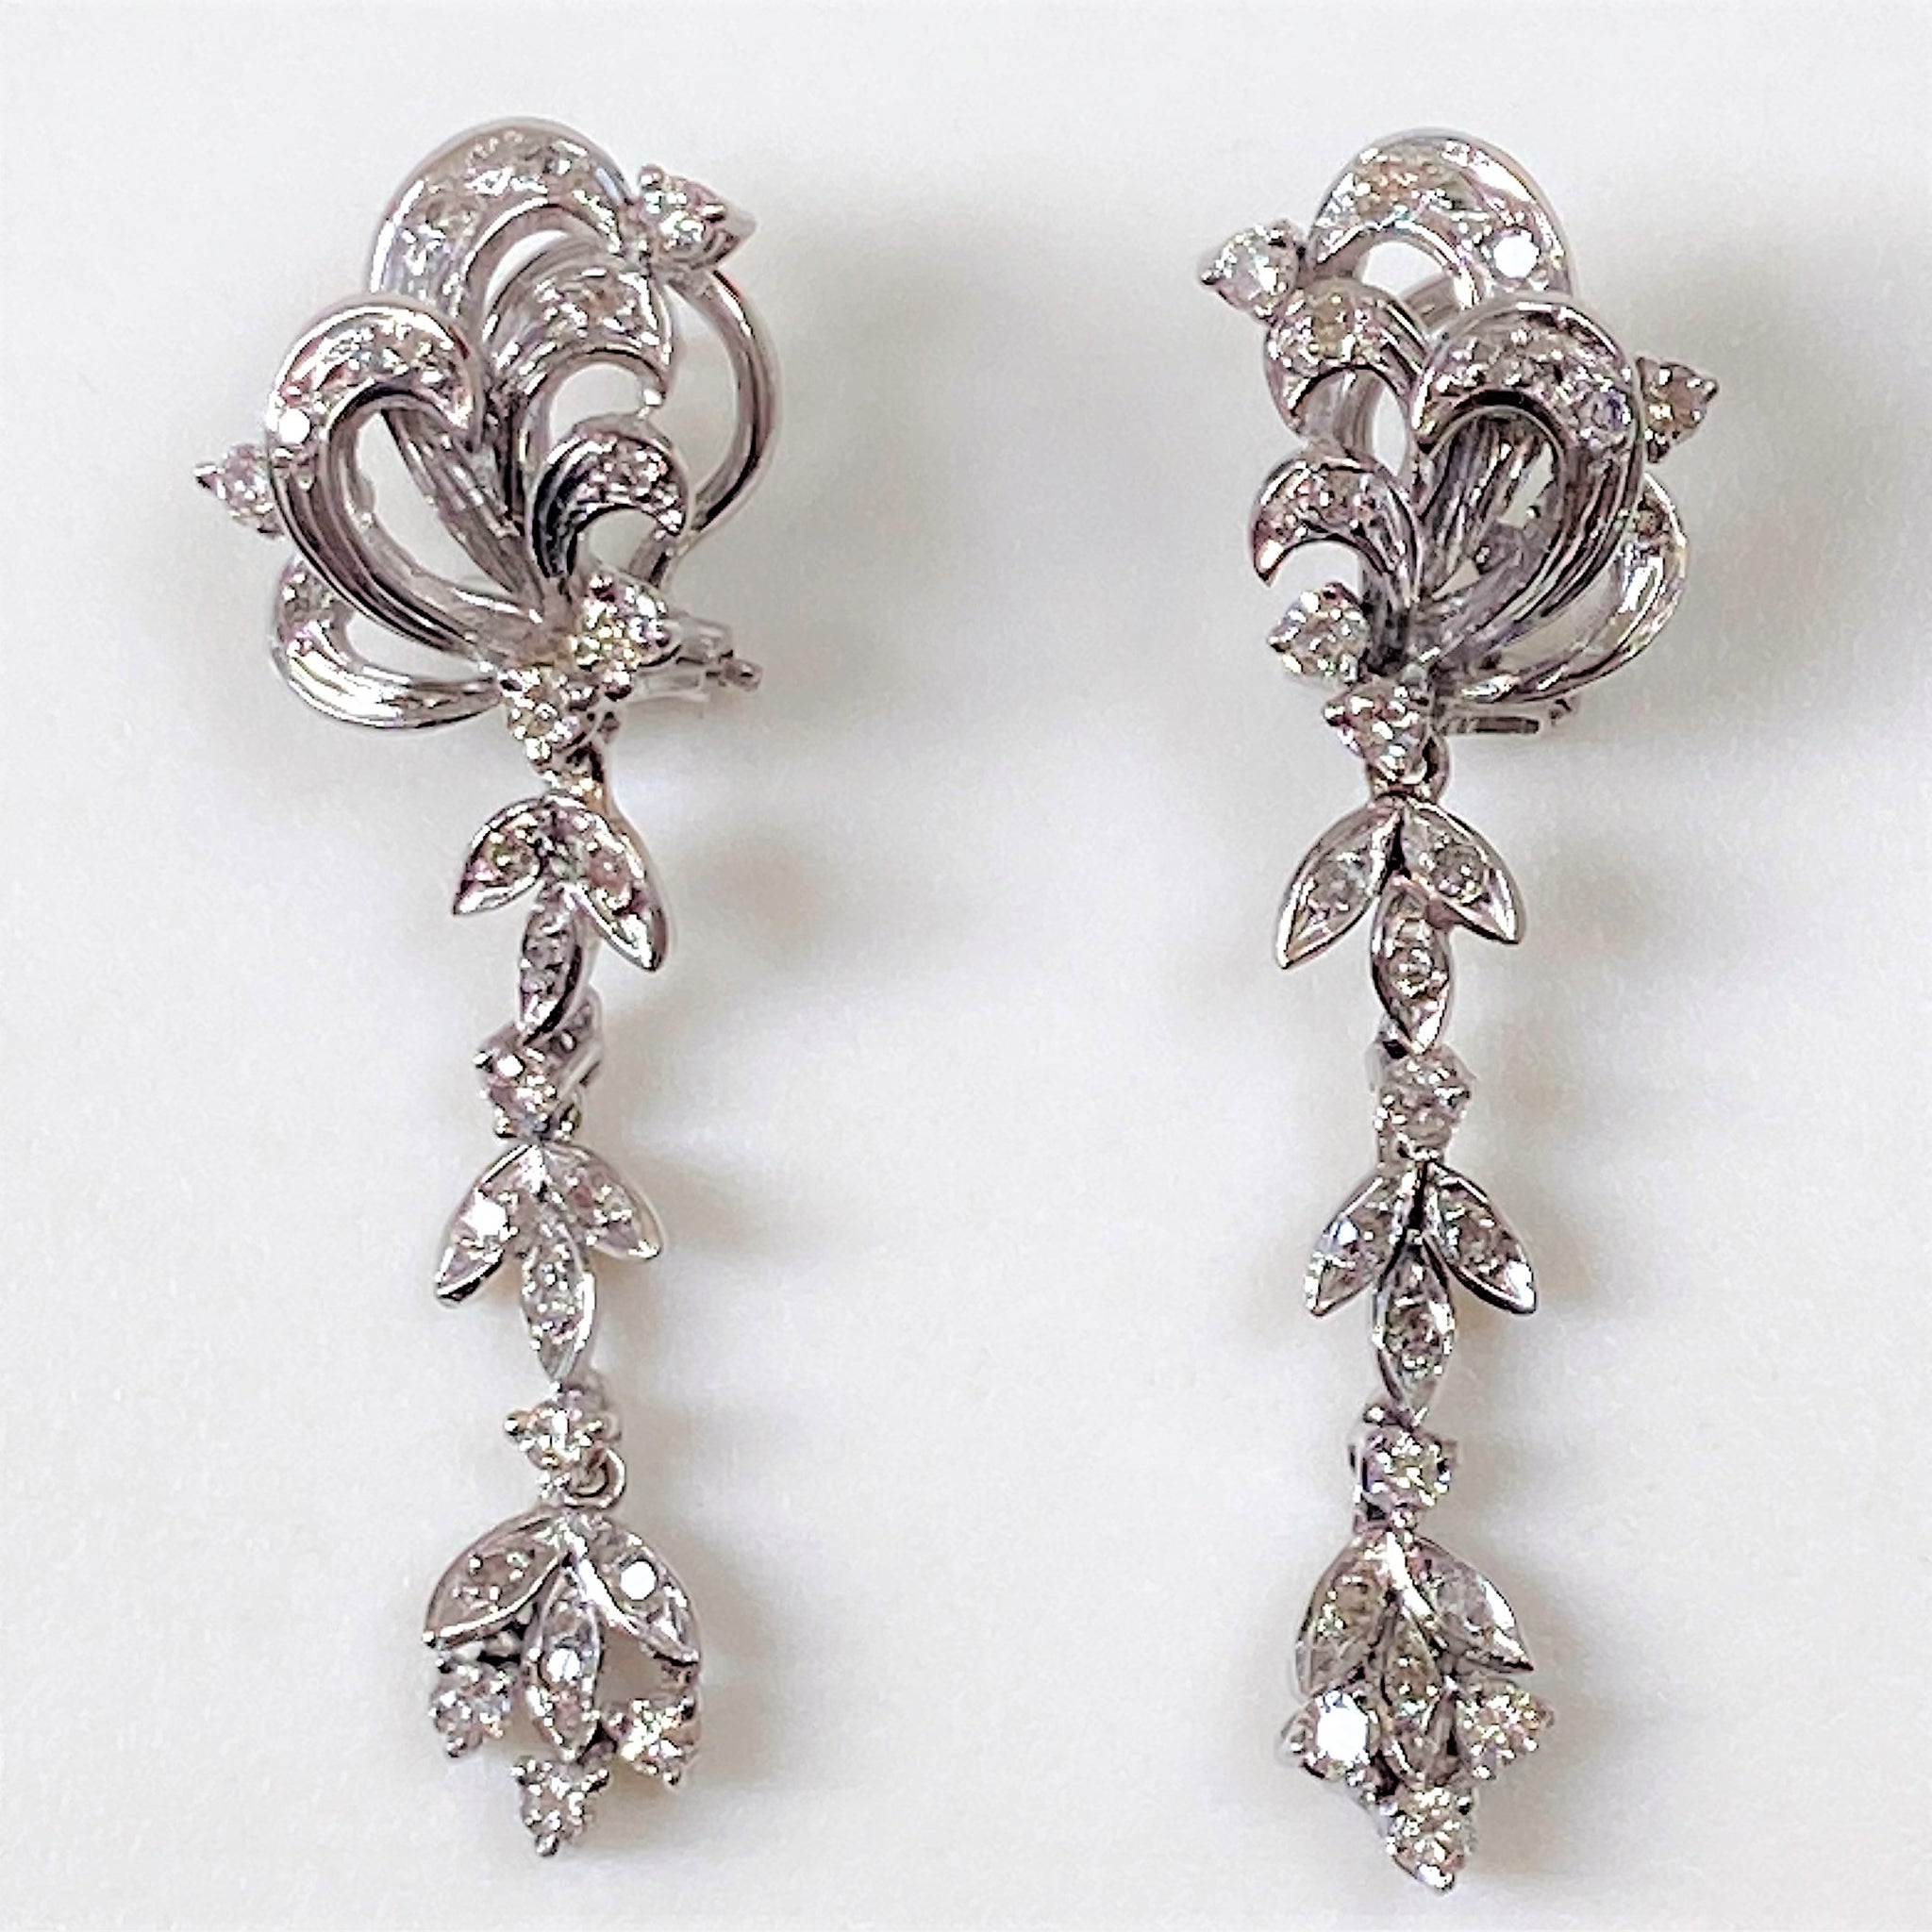 Vintage 10ct White Gold and Diamond Drop Earrings